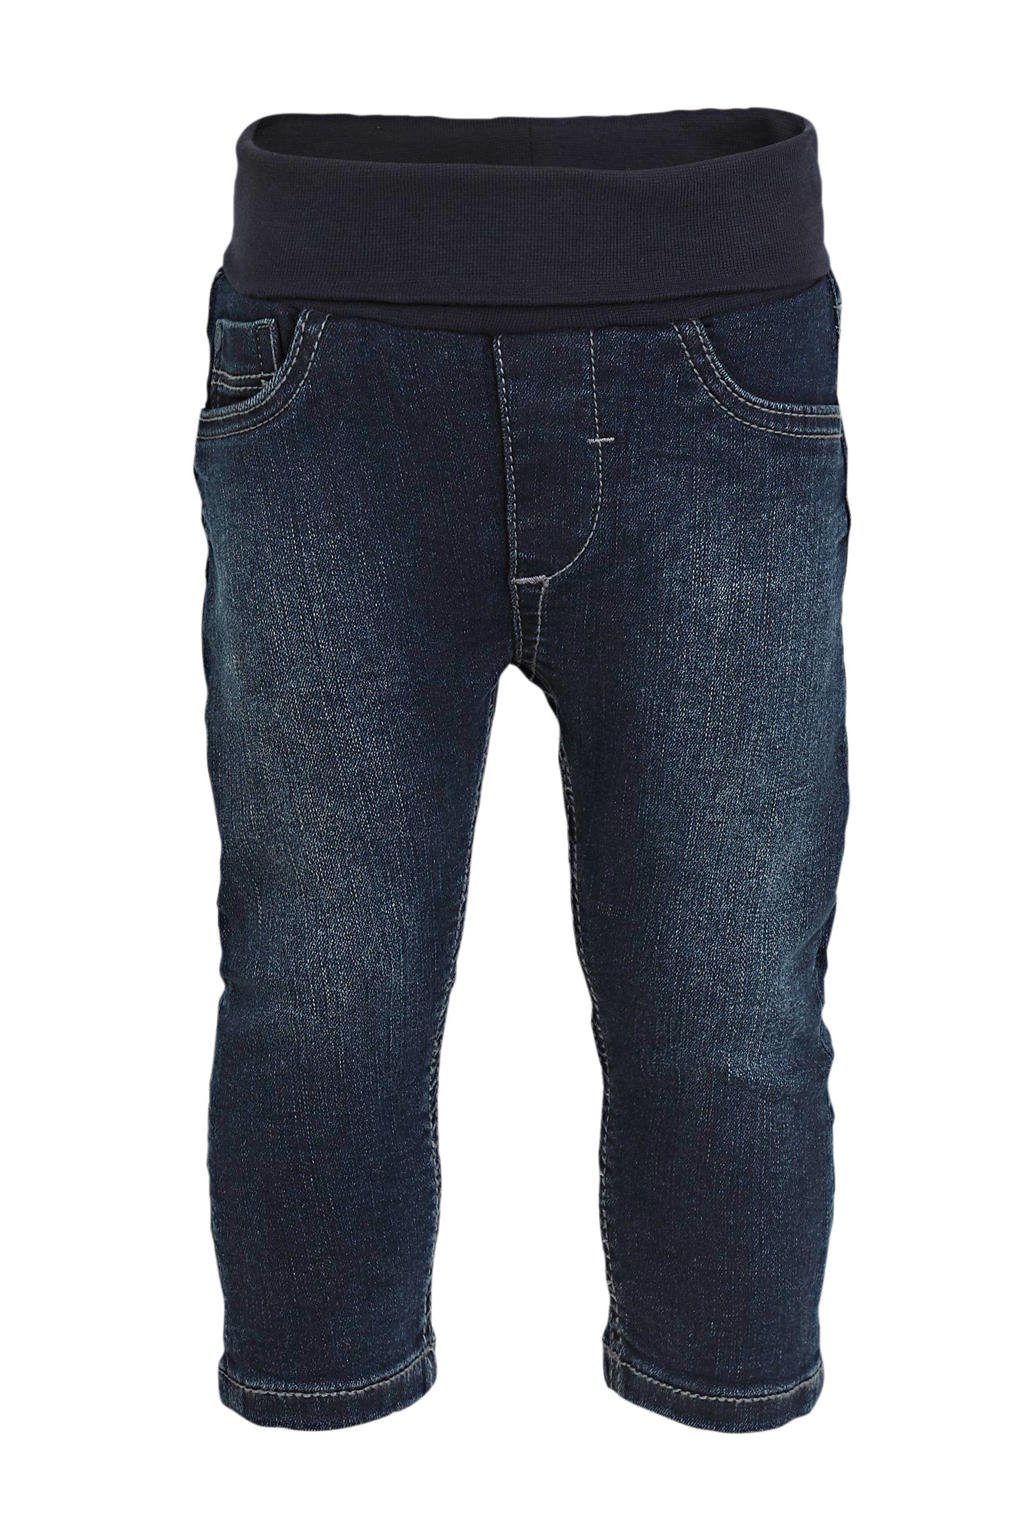 s.Oliver baby regular fit jeans donkerblauw